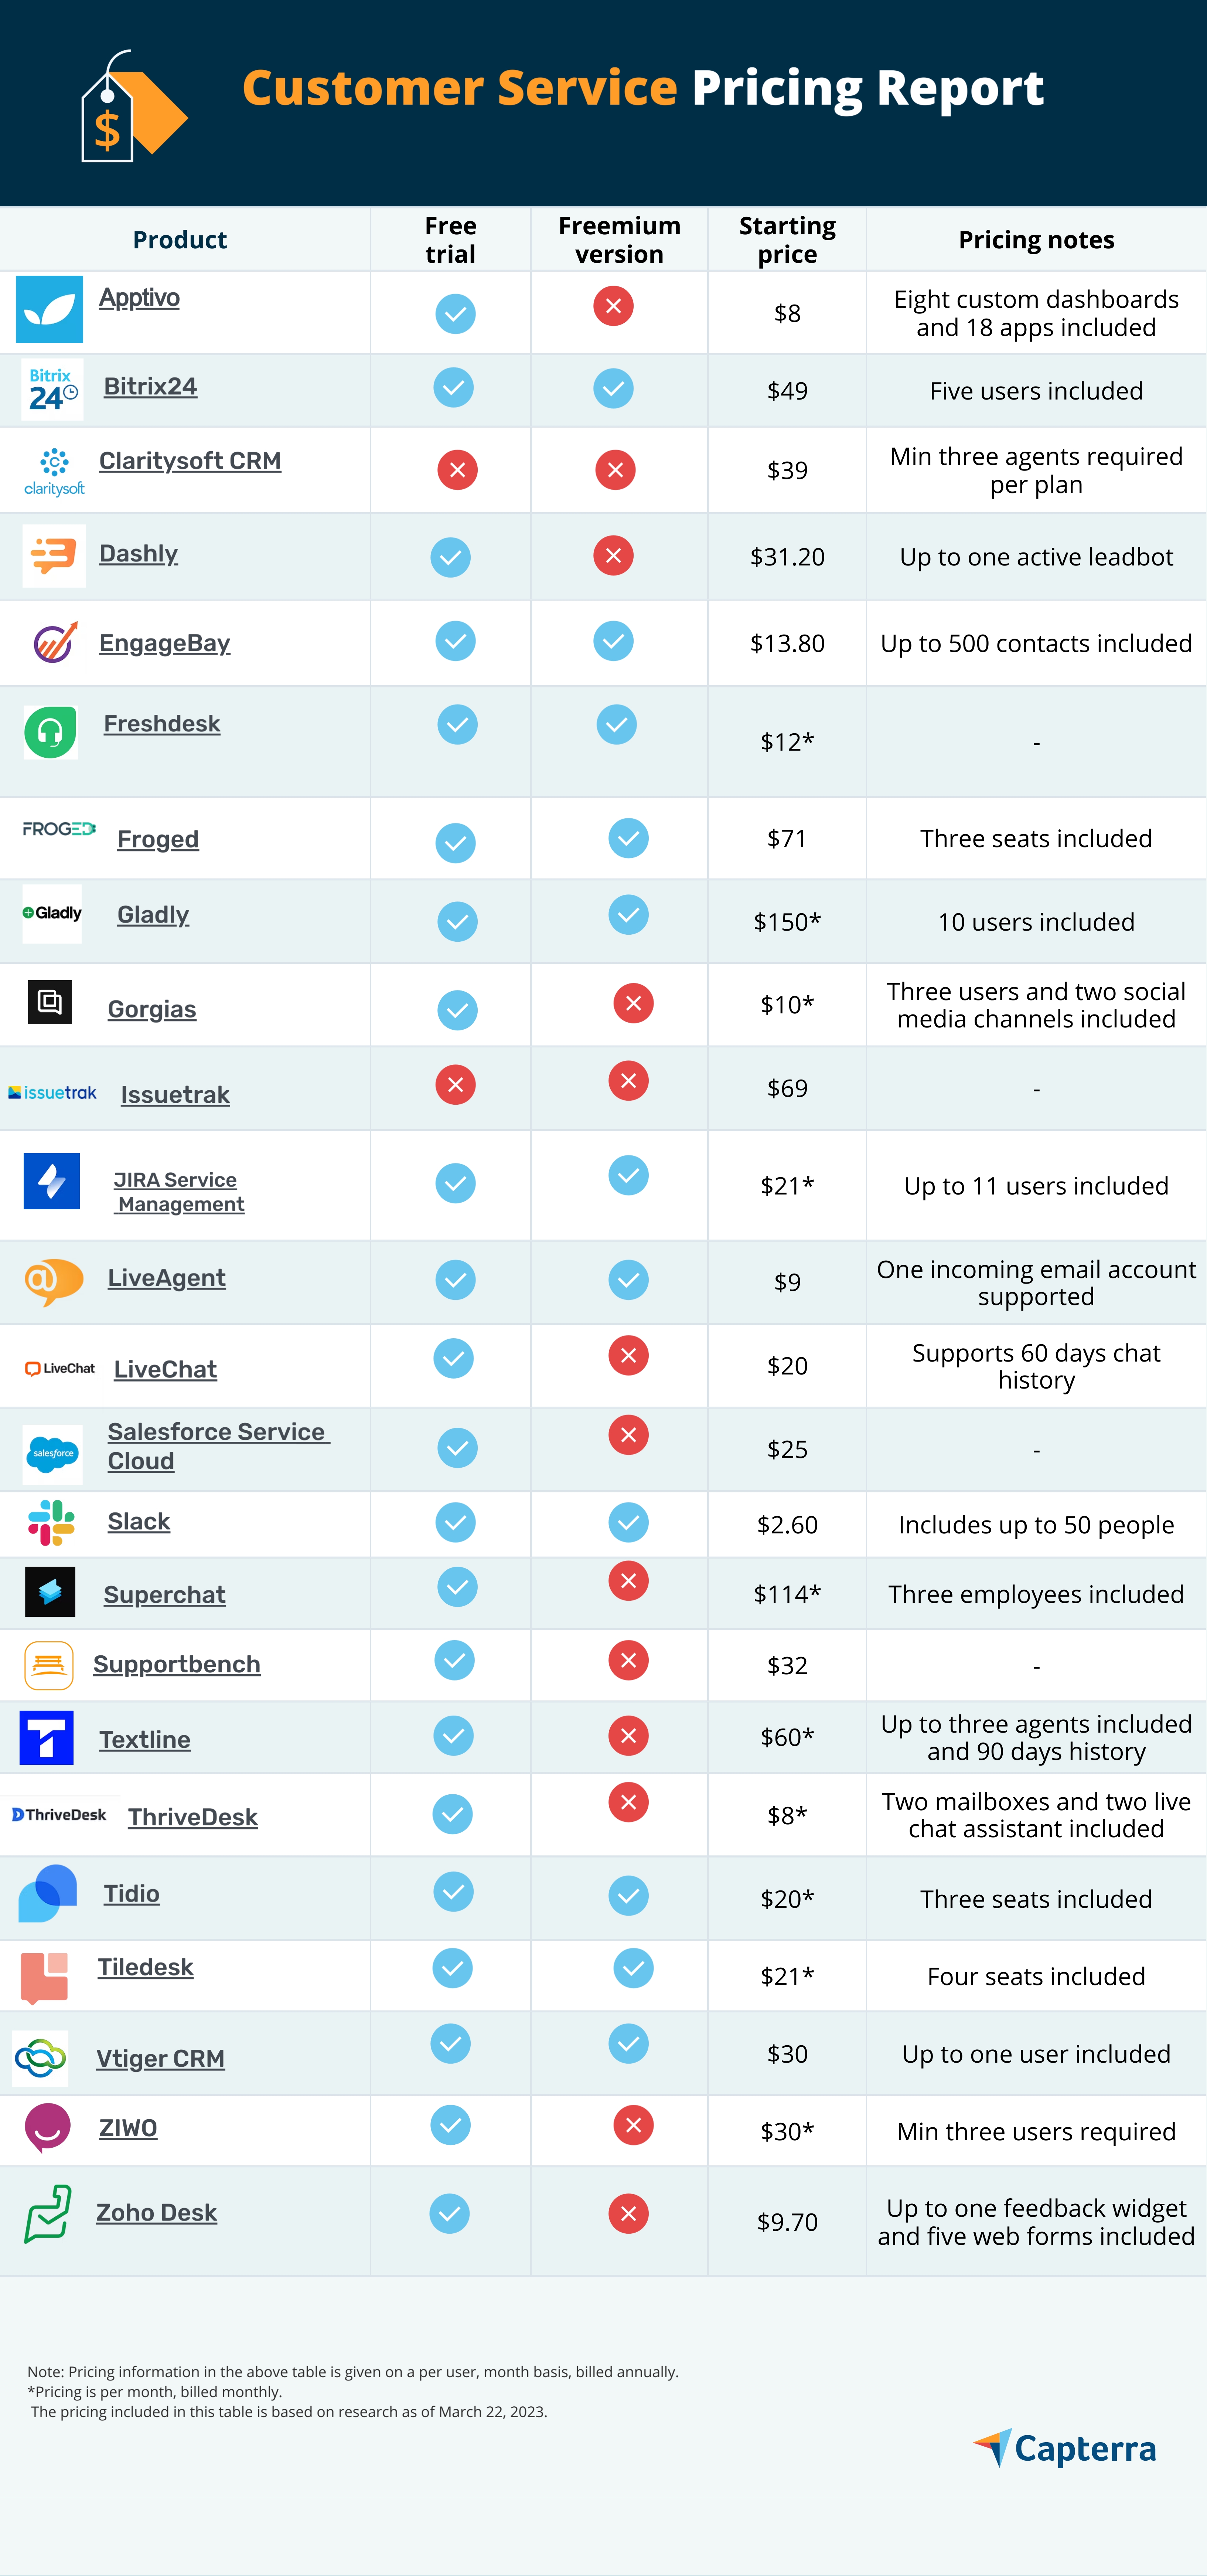 Comparison table for the blog article "Capterra Value Report: A Price Comparison Guide for Customer Service Software"